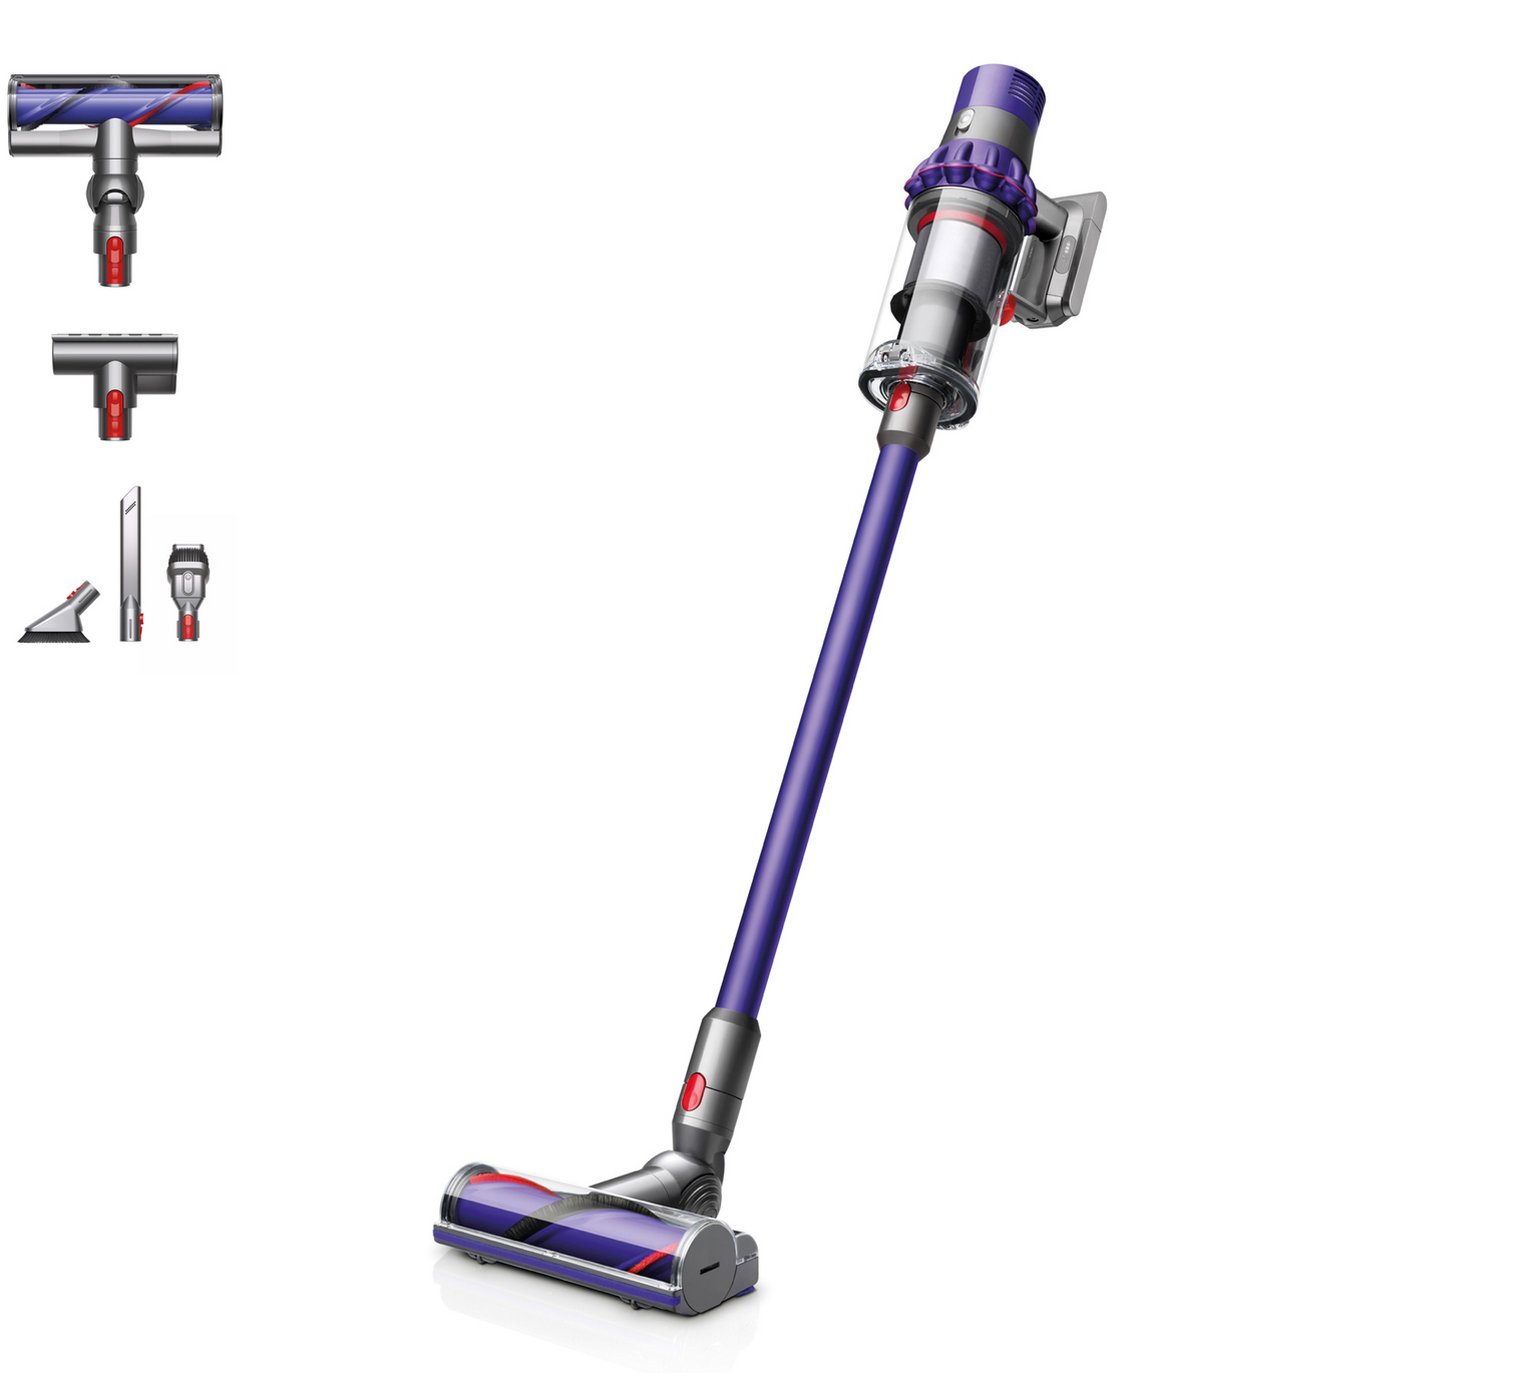 Dyson Cyclone V10 Animal Cordless Vacuum Cleaner